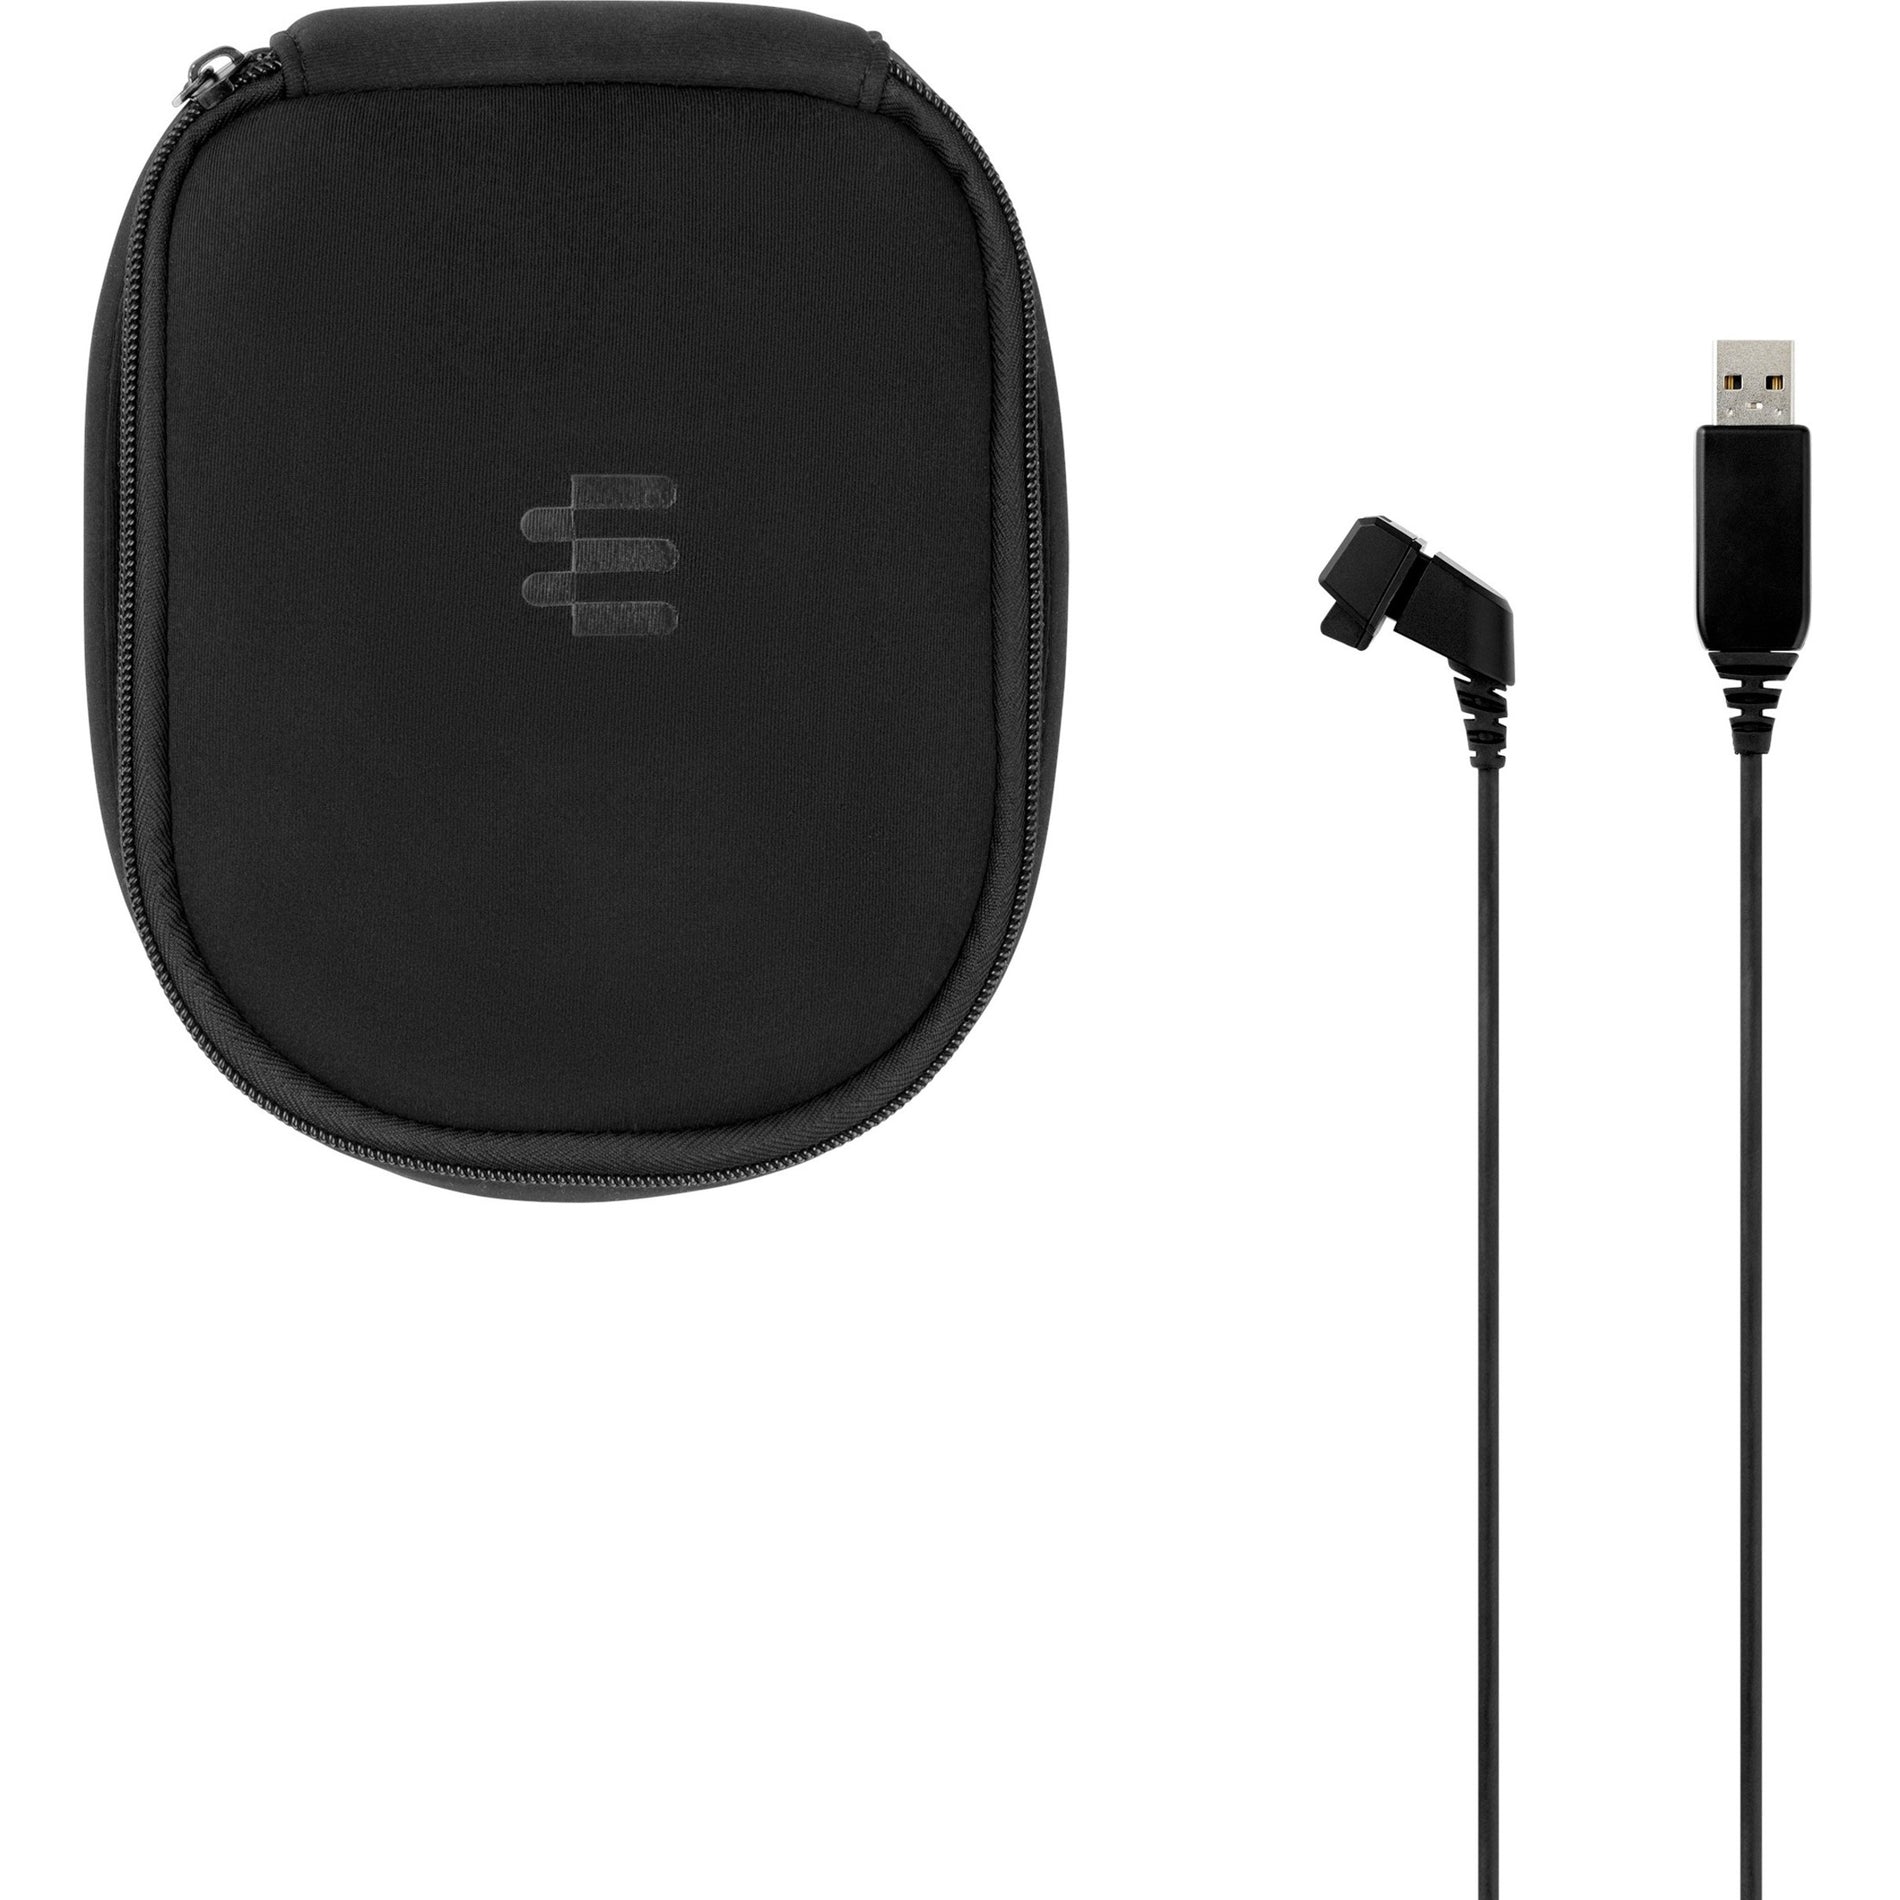 EPOS | SENNHEISER 1000982 Headset Accessory Kit, Black - Carry Pouch, USB-A Charging Cable